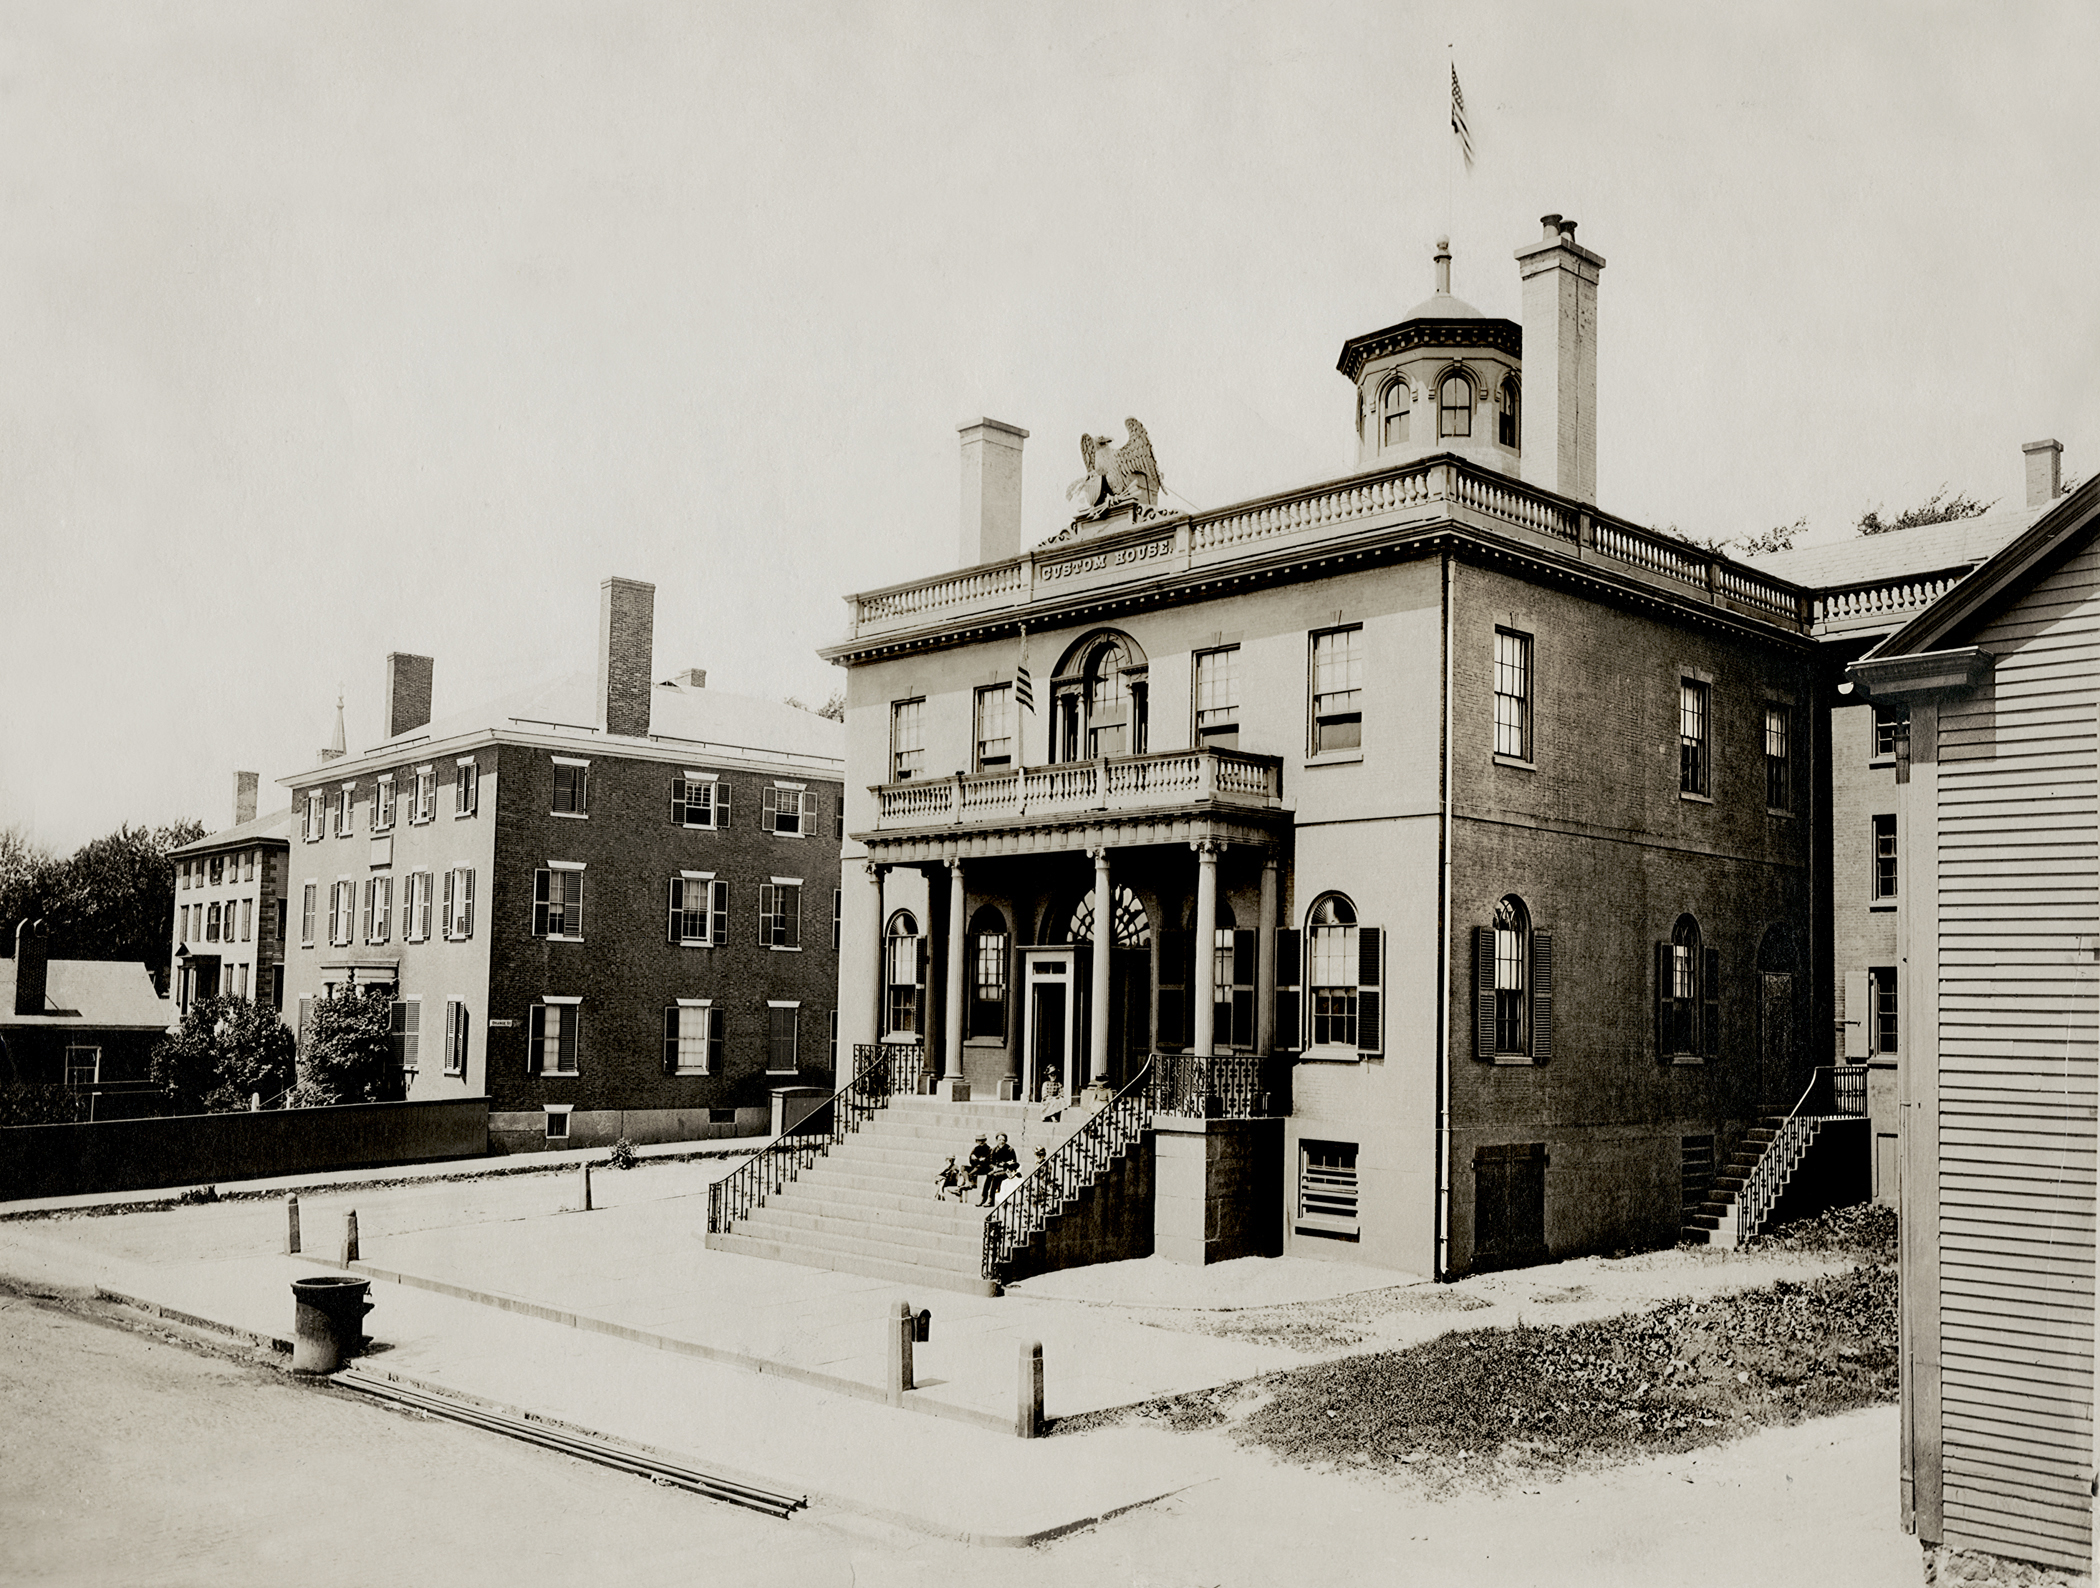 The Custom House at Salem, Mass.Nathaniel Hawthorne served as customs surveyor for the Port of Salem in this customhouse from 1846-1849. The Surveyor's office was located on the first floor, to the left of the main entrance, with large windows overlooking Derby Wharf, where Hawthorne would gaze in anticipation of a ship's arrival.